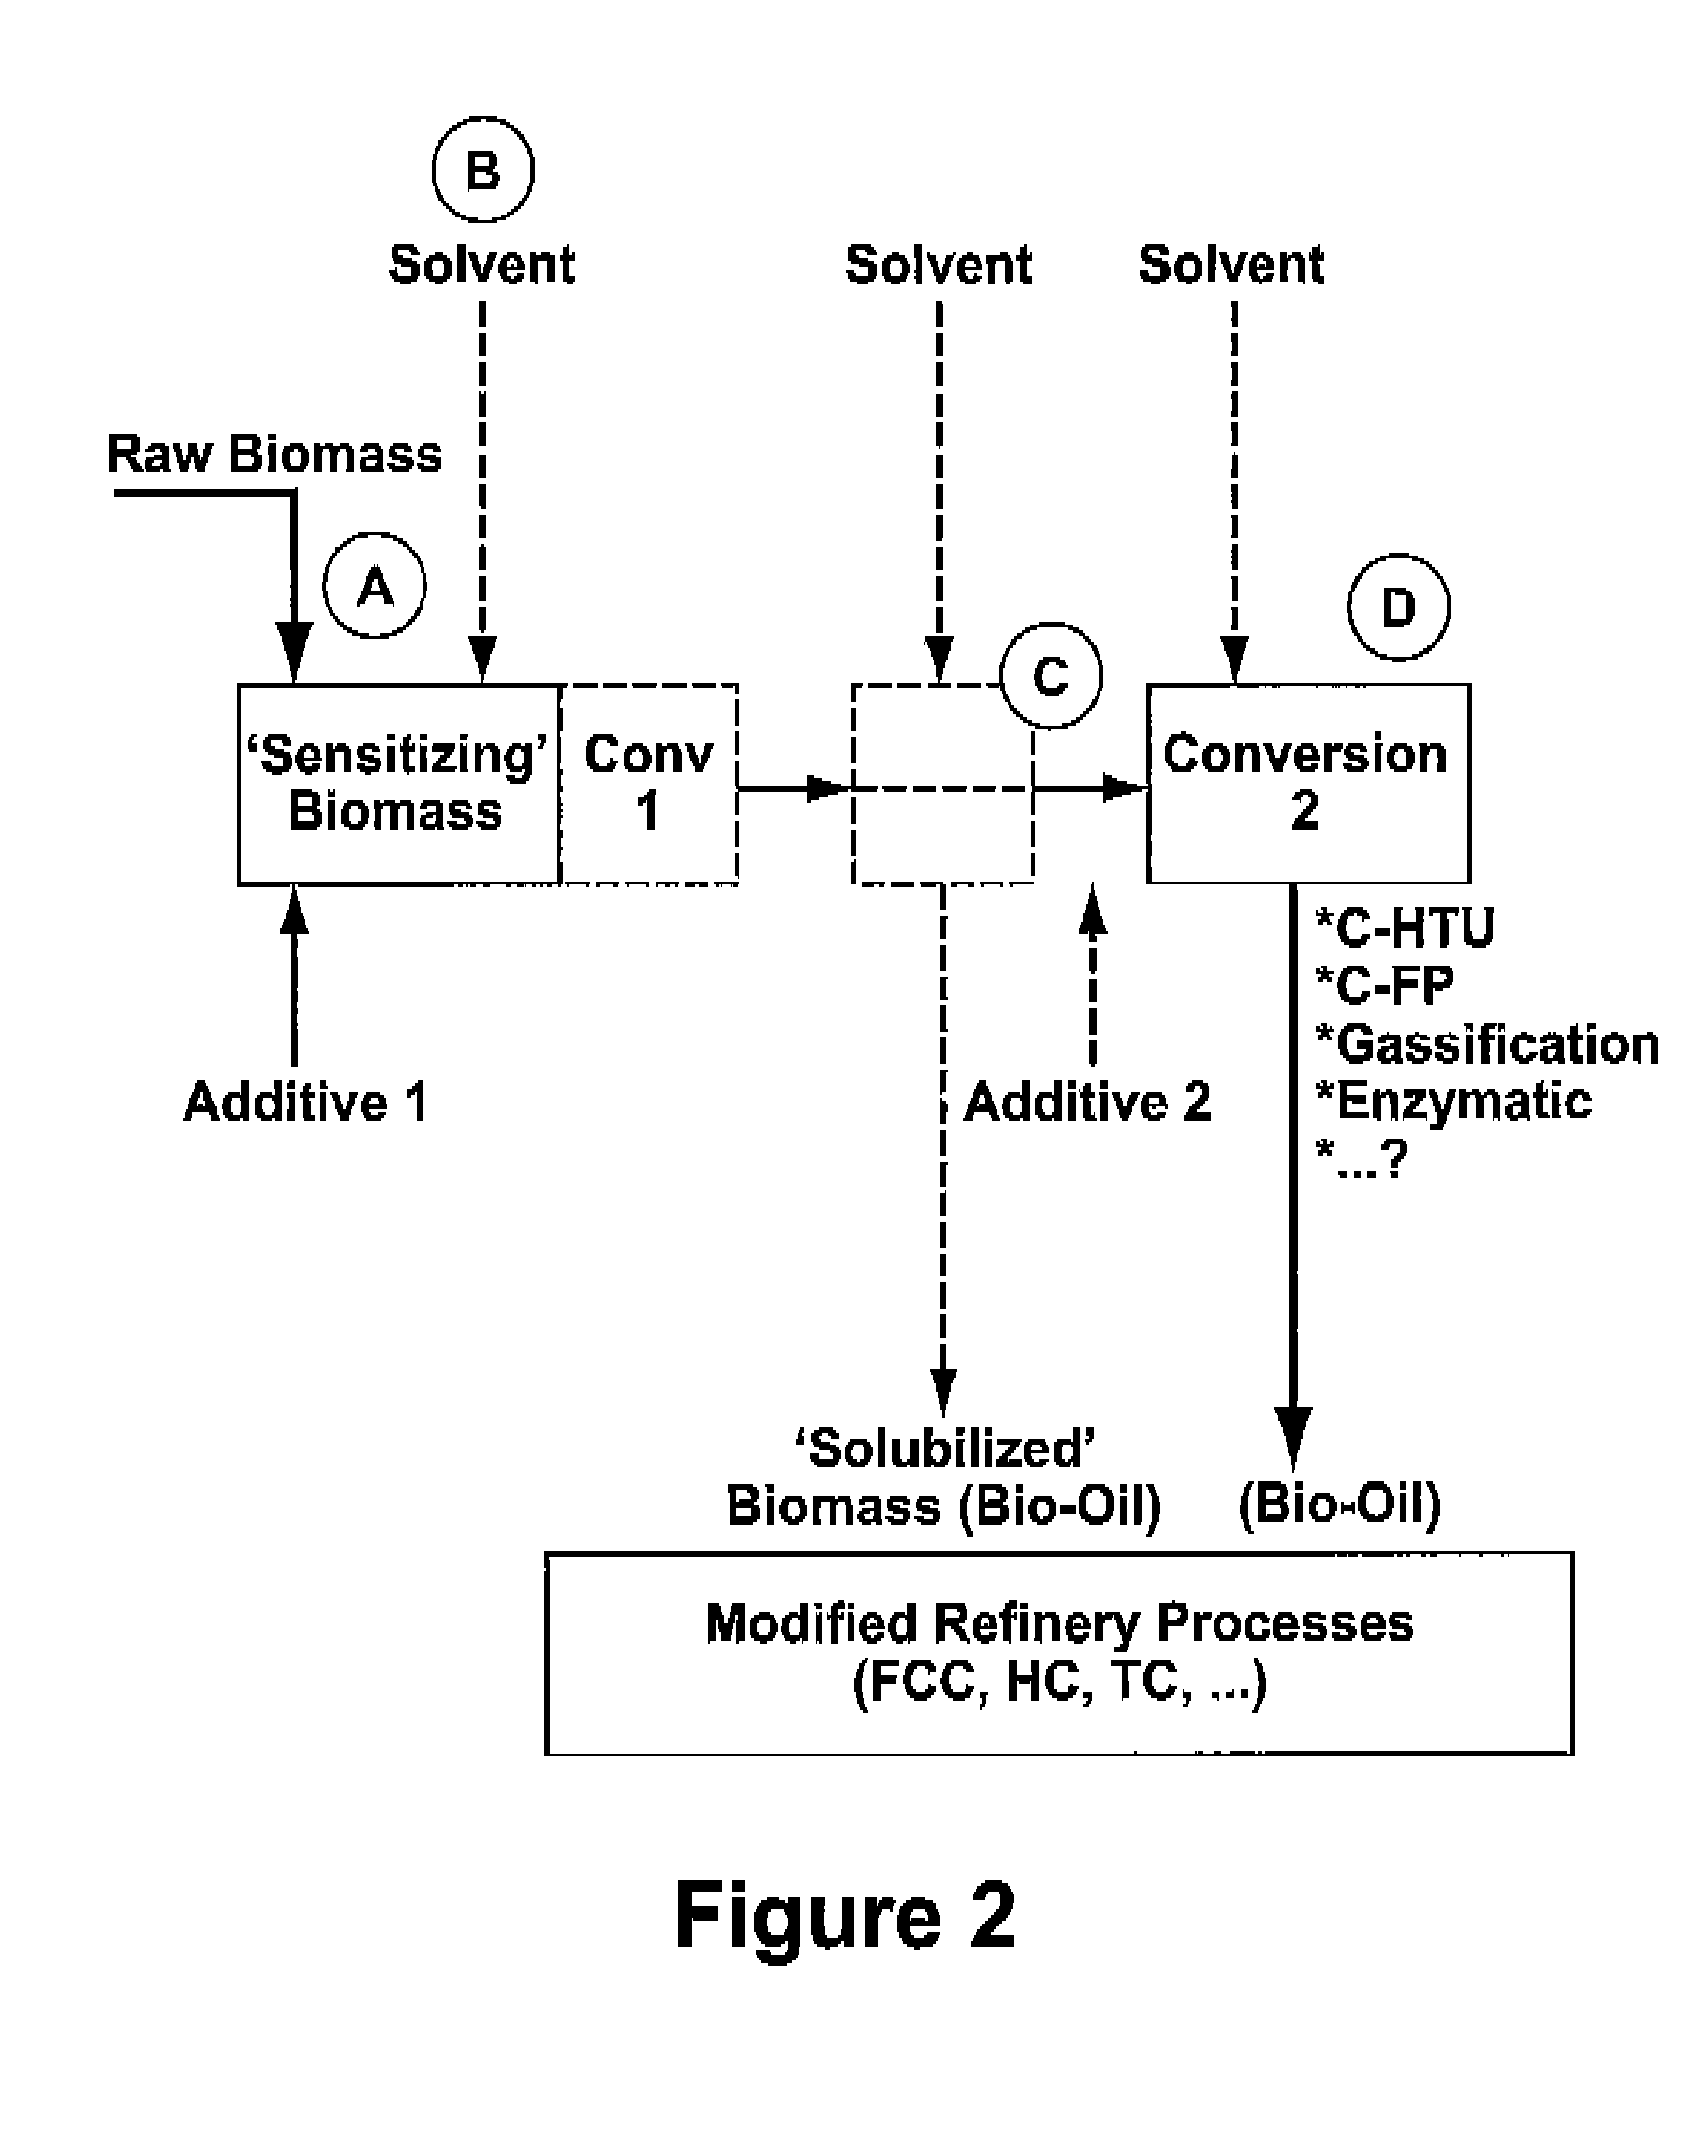 Process for the conversion of biomass to liquid fuels and specialty chemicals